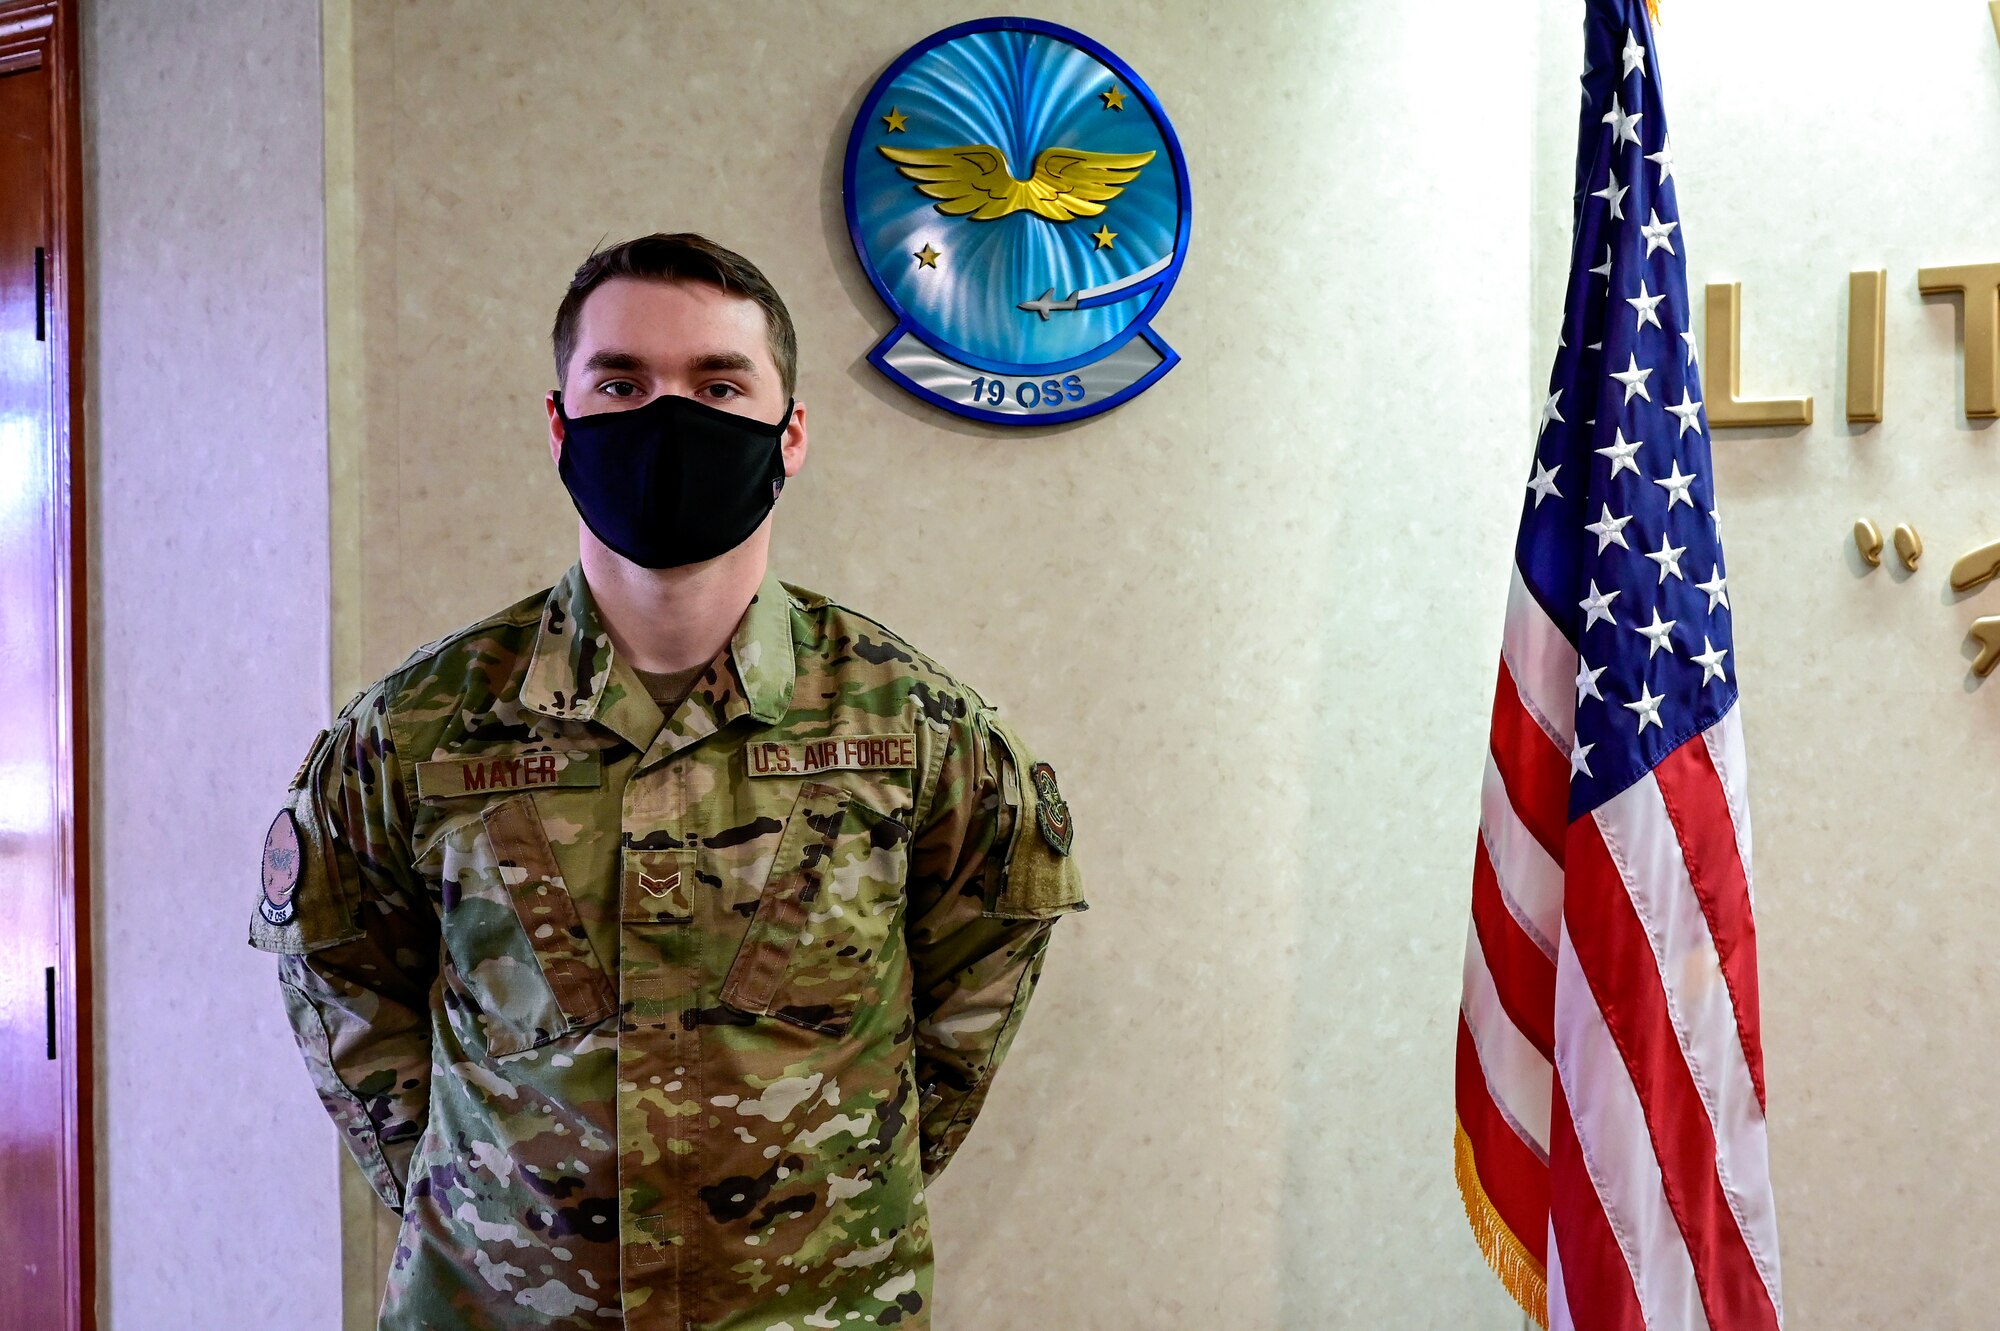 An Airman poses for a photo next to a flag.